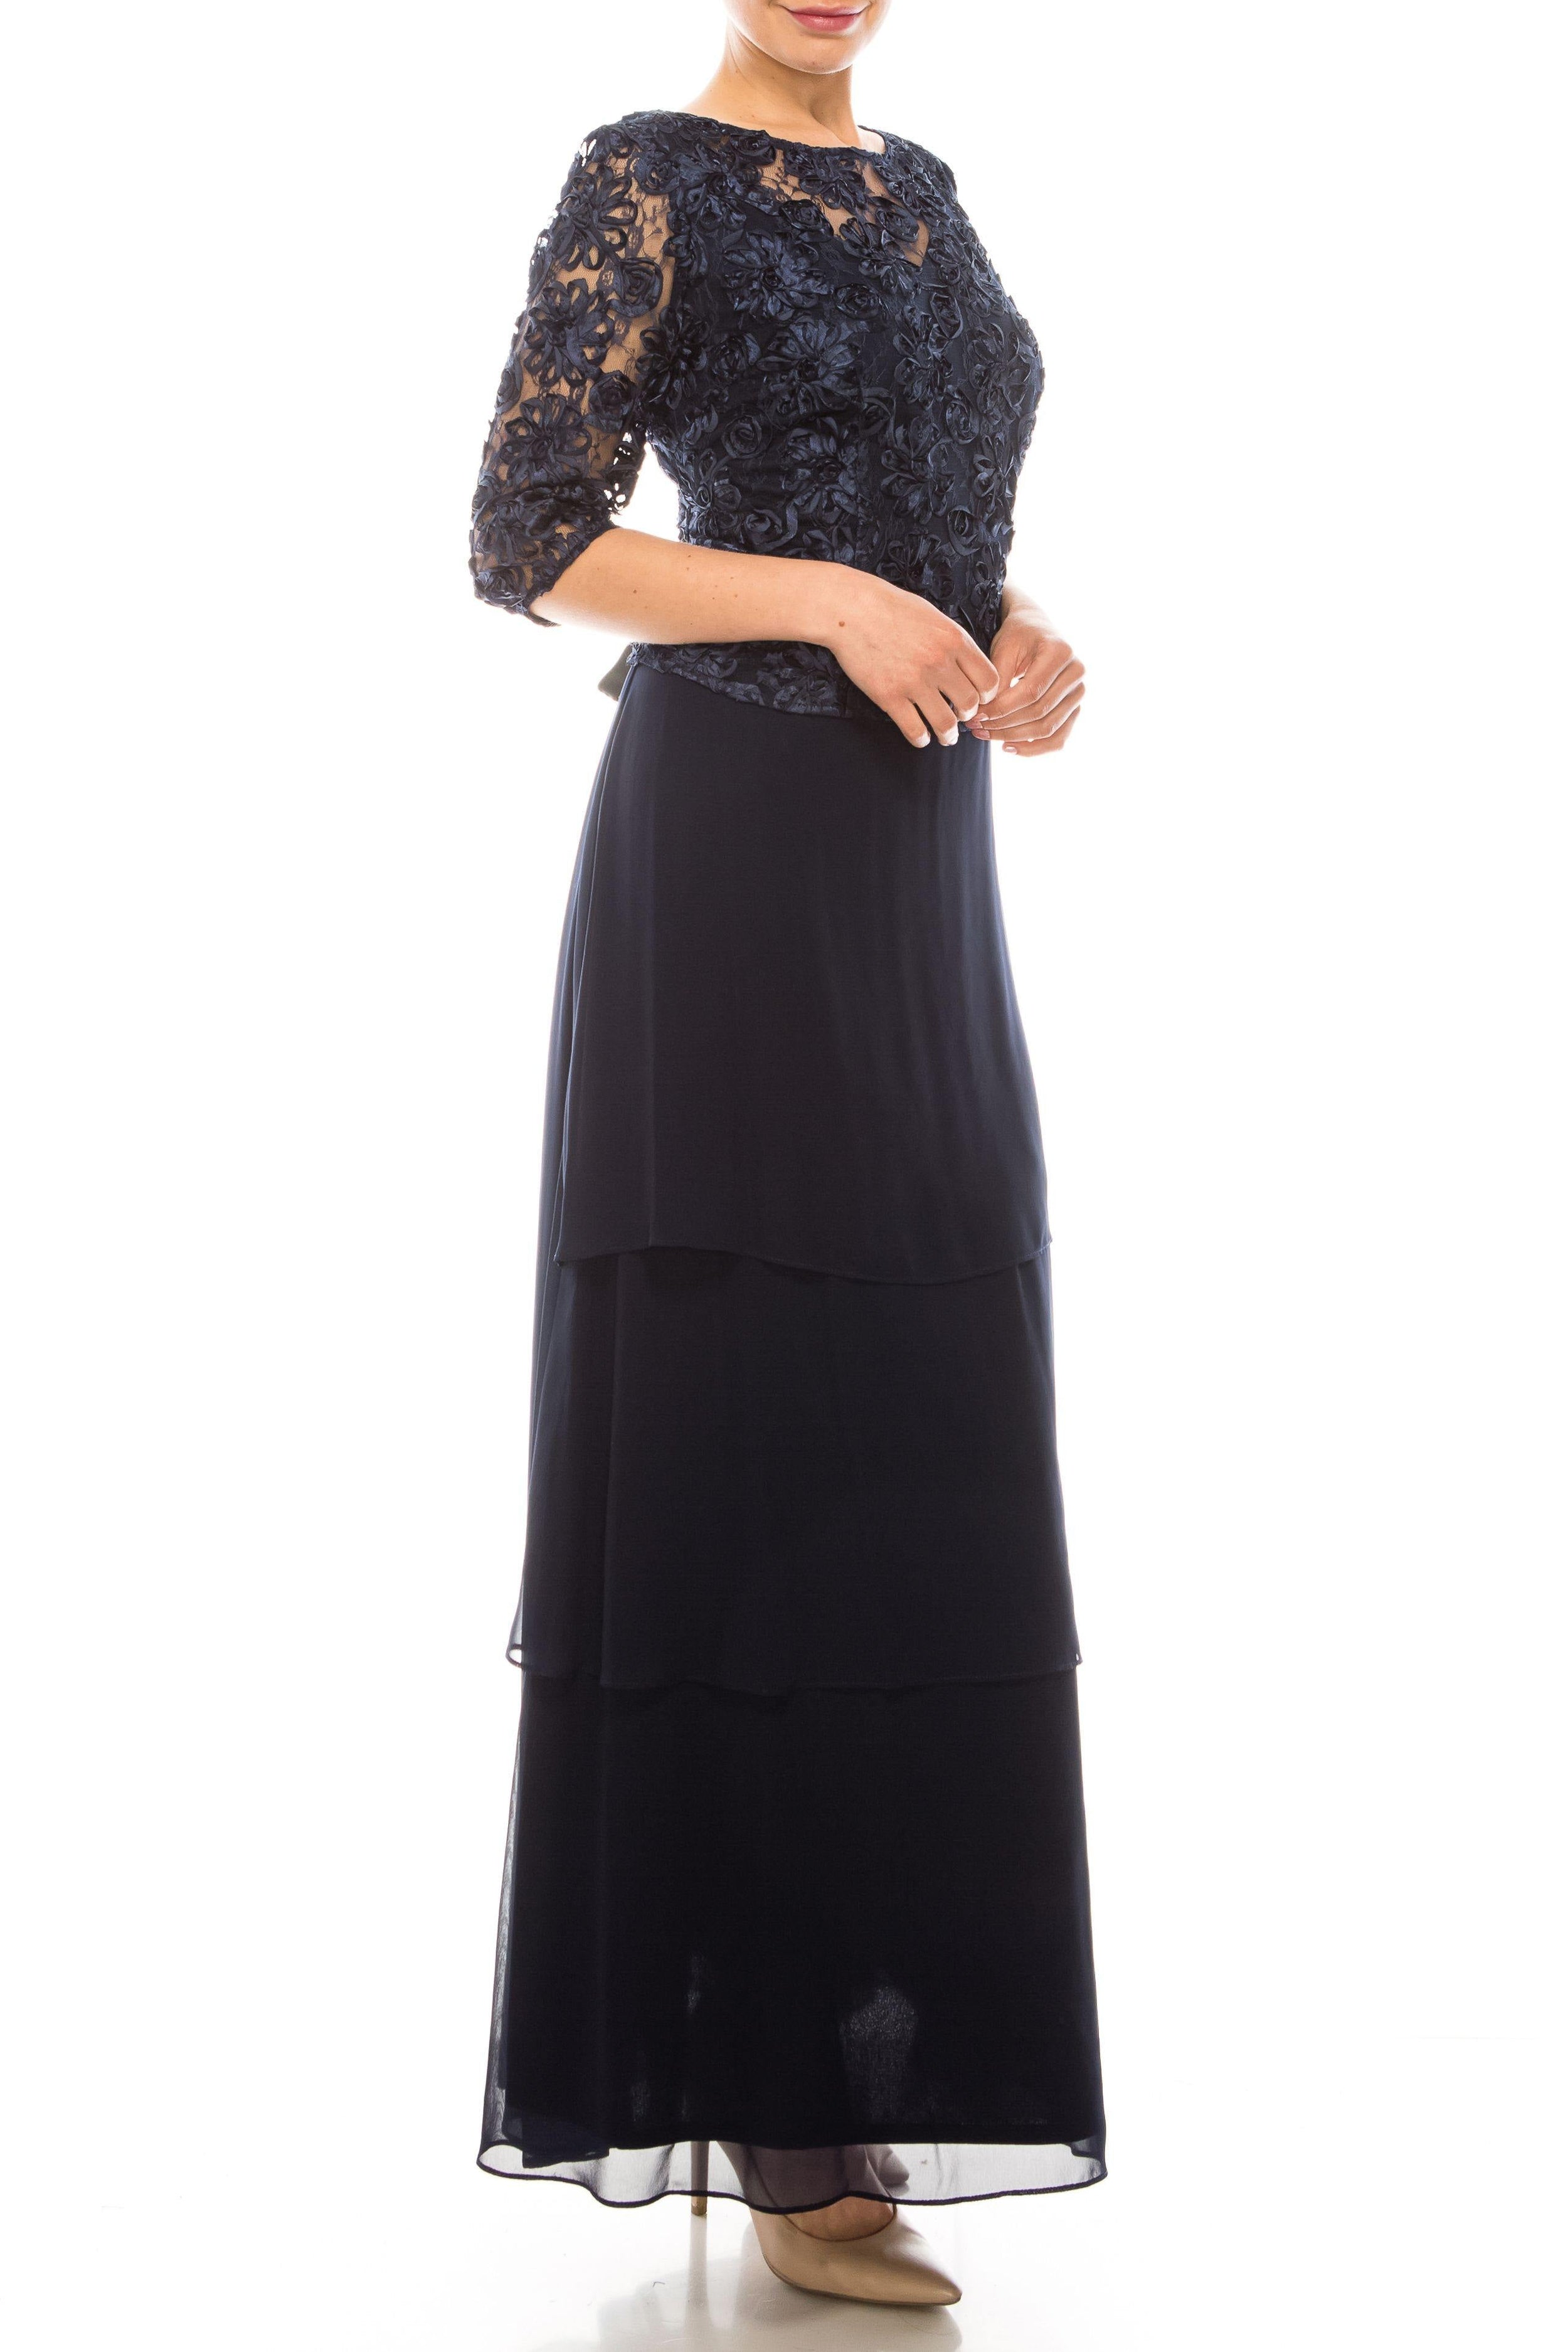 Le Bos Long Formal Mother of the Bride Dress 28145 - The Dress Outlet